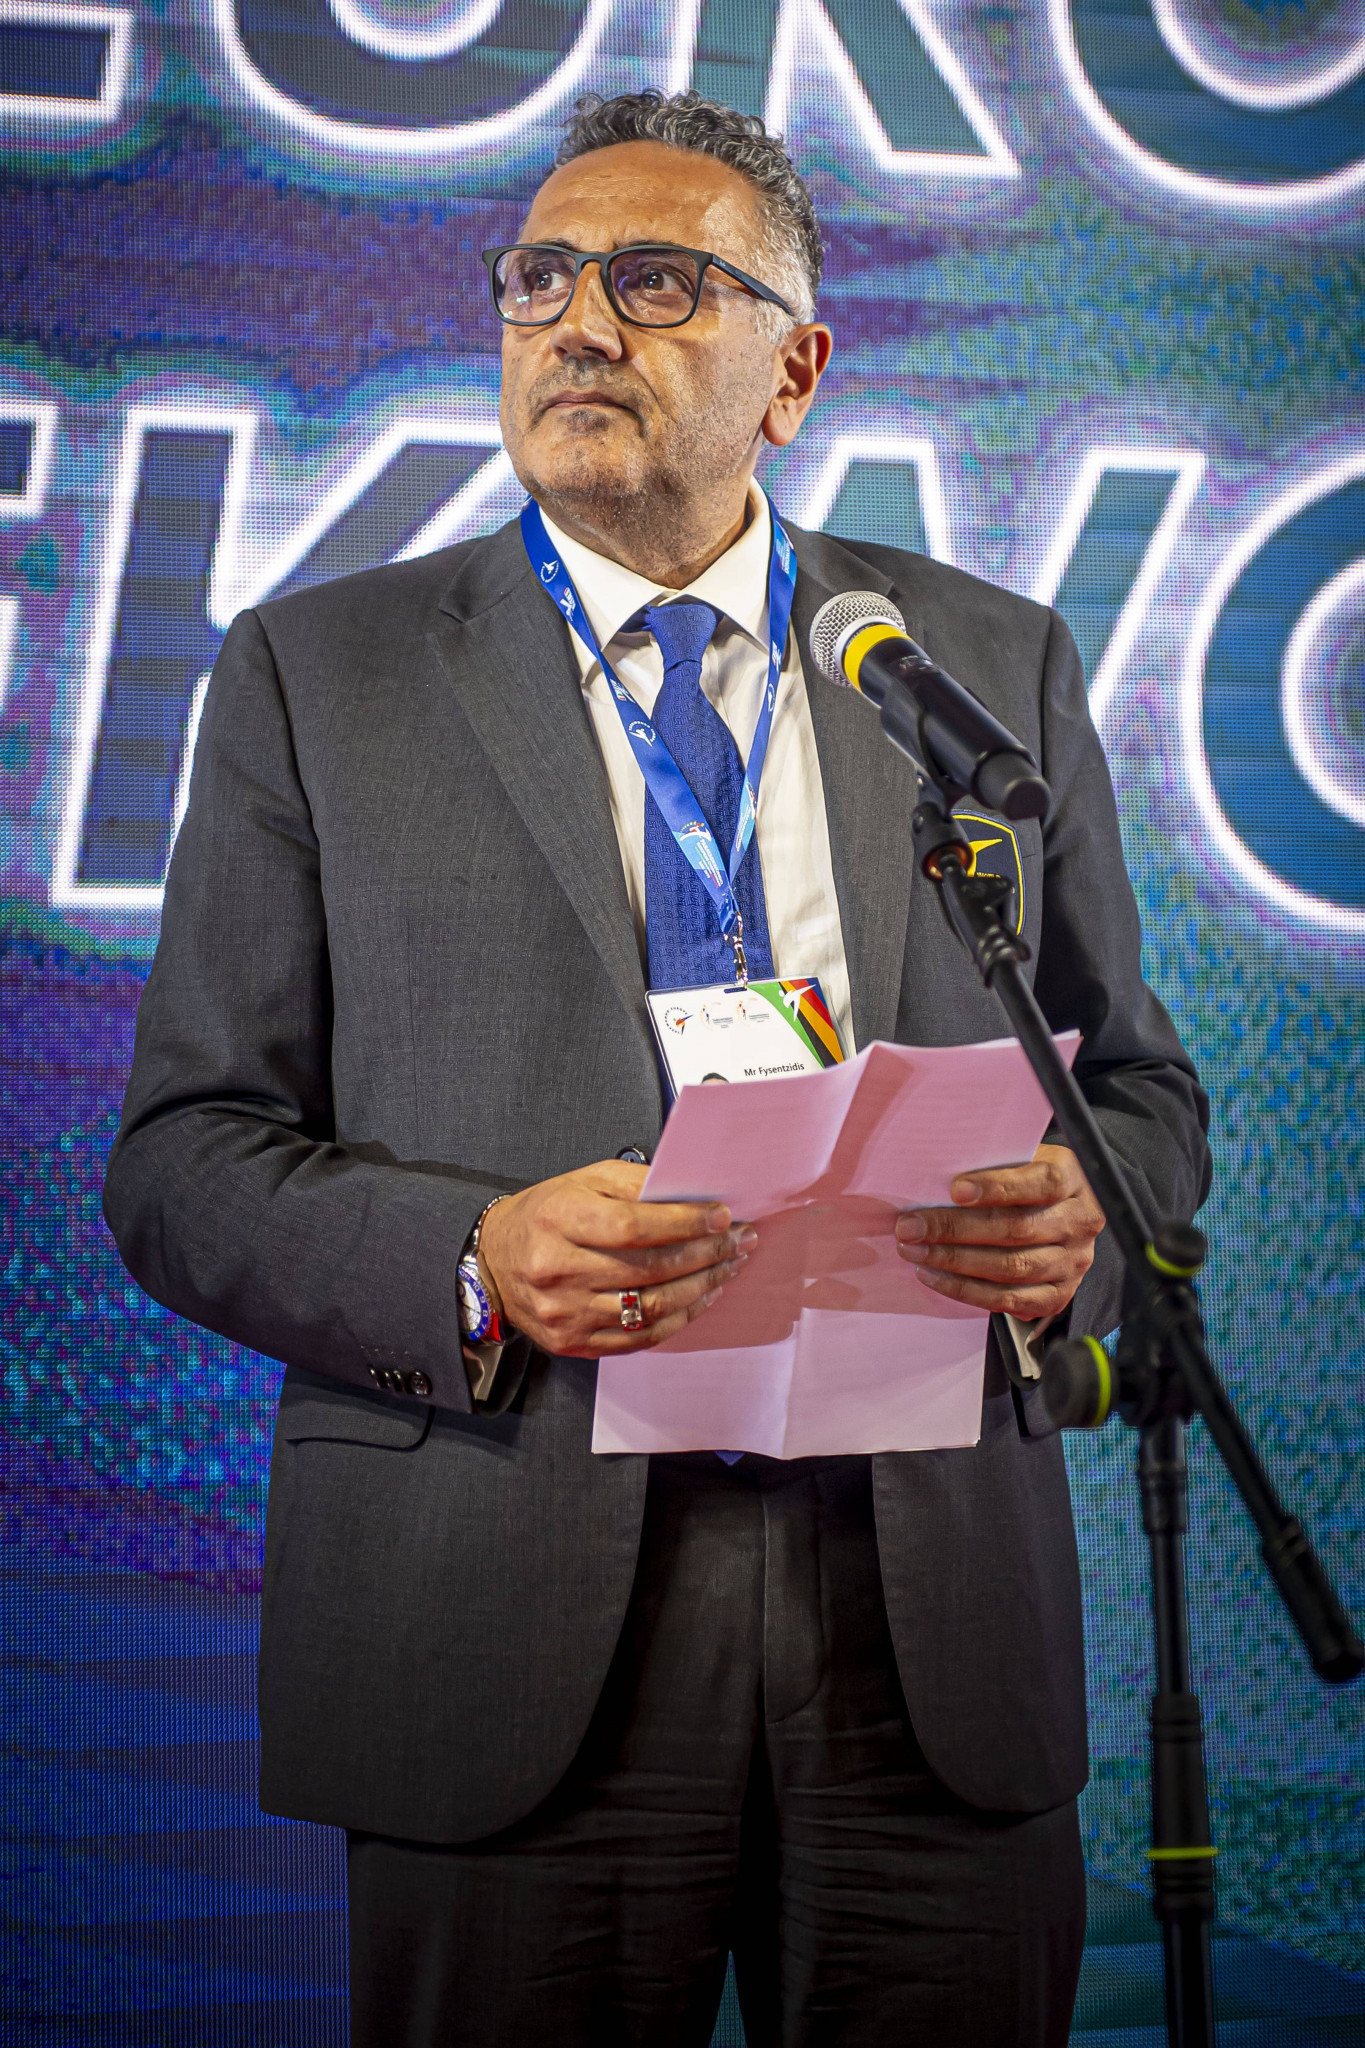 WTE secretary general Michael Fysentzidis has thanked organisers of the 2019 G4 Extra European Taekwondo Championships in Bari for delivering a "prime" event ©WTE